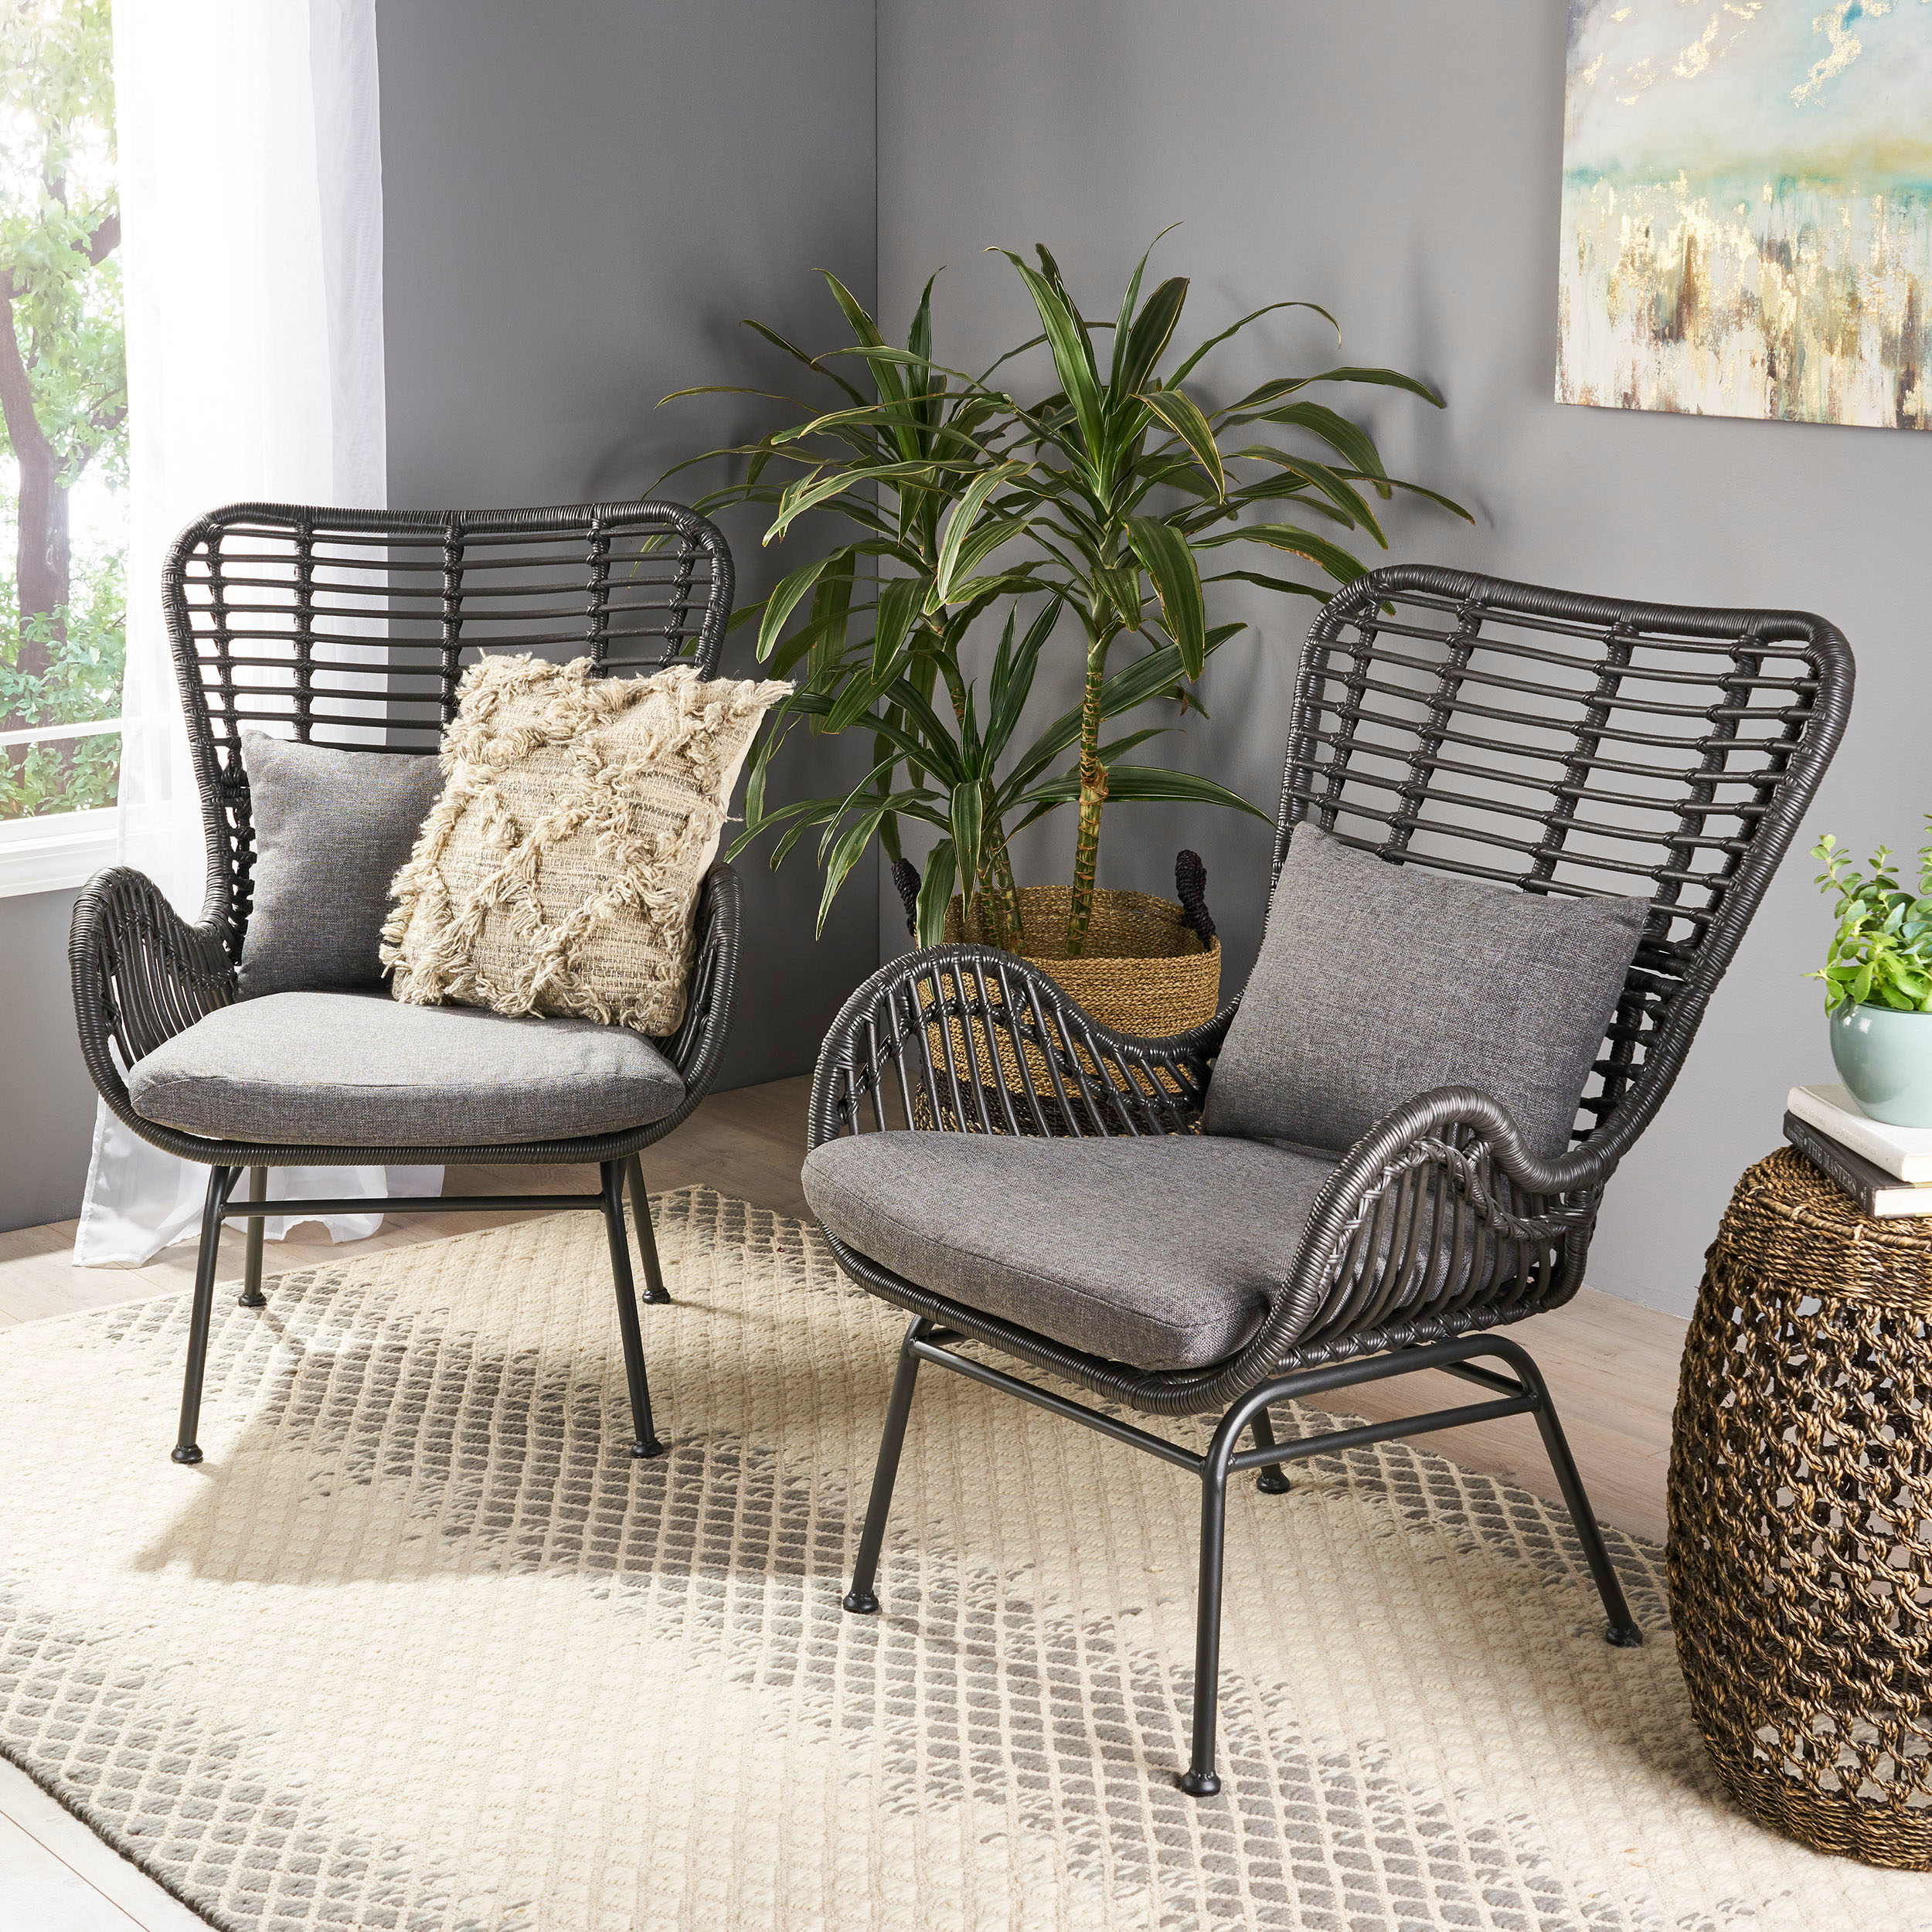 Gloria Indoor Wicker Club Chairs With Cushions (Set Of 2) - Light Brown, Black, Beige